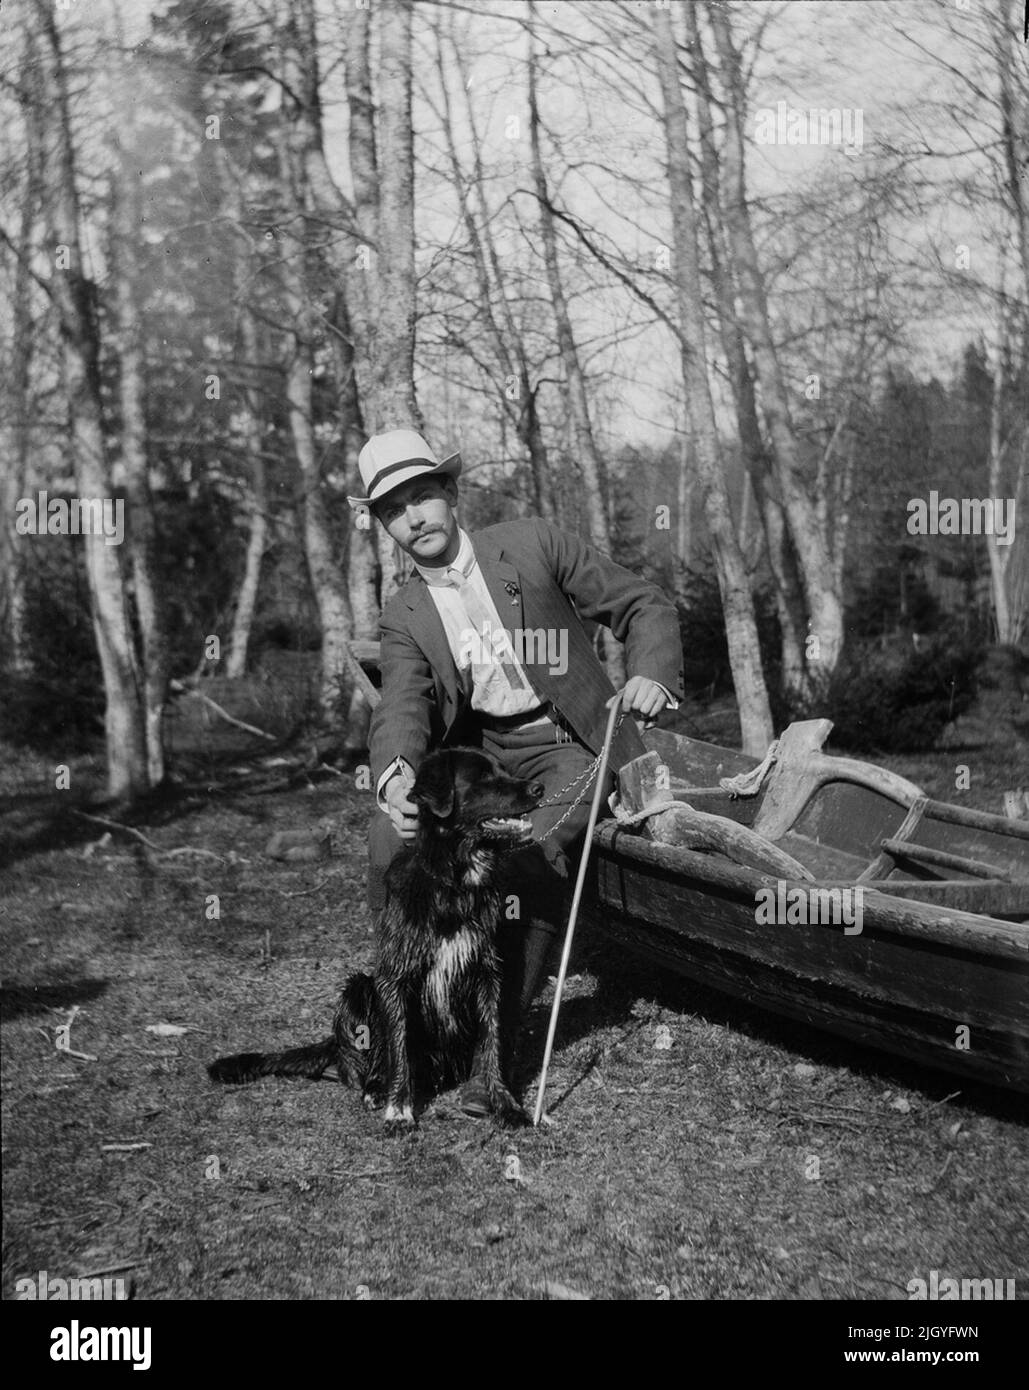 Josef Ärnström with dog by boat. Josef Ärnström's image collection was acquired by the Upplands Museum 2011.Josef Ärnström was born in 1887 in Keps, Hållnäs parish, Uppland. He was married to Nora Selldin, born in Timrå, Medelpad. Both Josef and his wife Nora took their degrees around 1910 at the teacher's seminar in Uppsala. In Medelpad, the couple received their first teacher services at Berge school as a newlyweds about 1910-12. The relocation then moved on to Lapland where Josef was employed in Toulleuvaara between about 1913-18. Joseph ended his career as an exercise teacher from about 19 Stock Photo